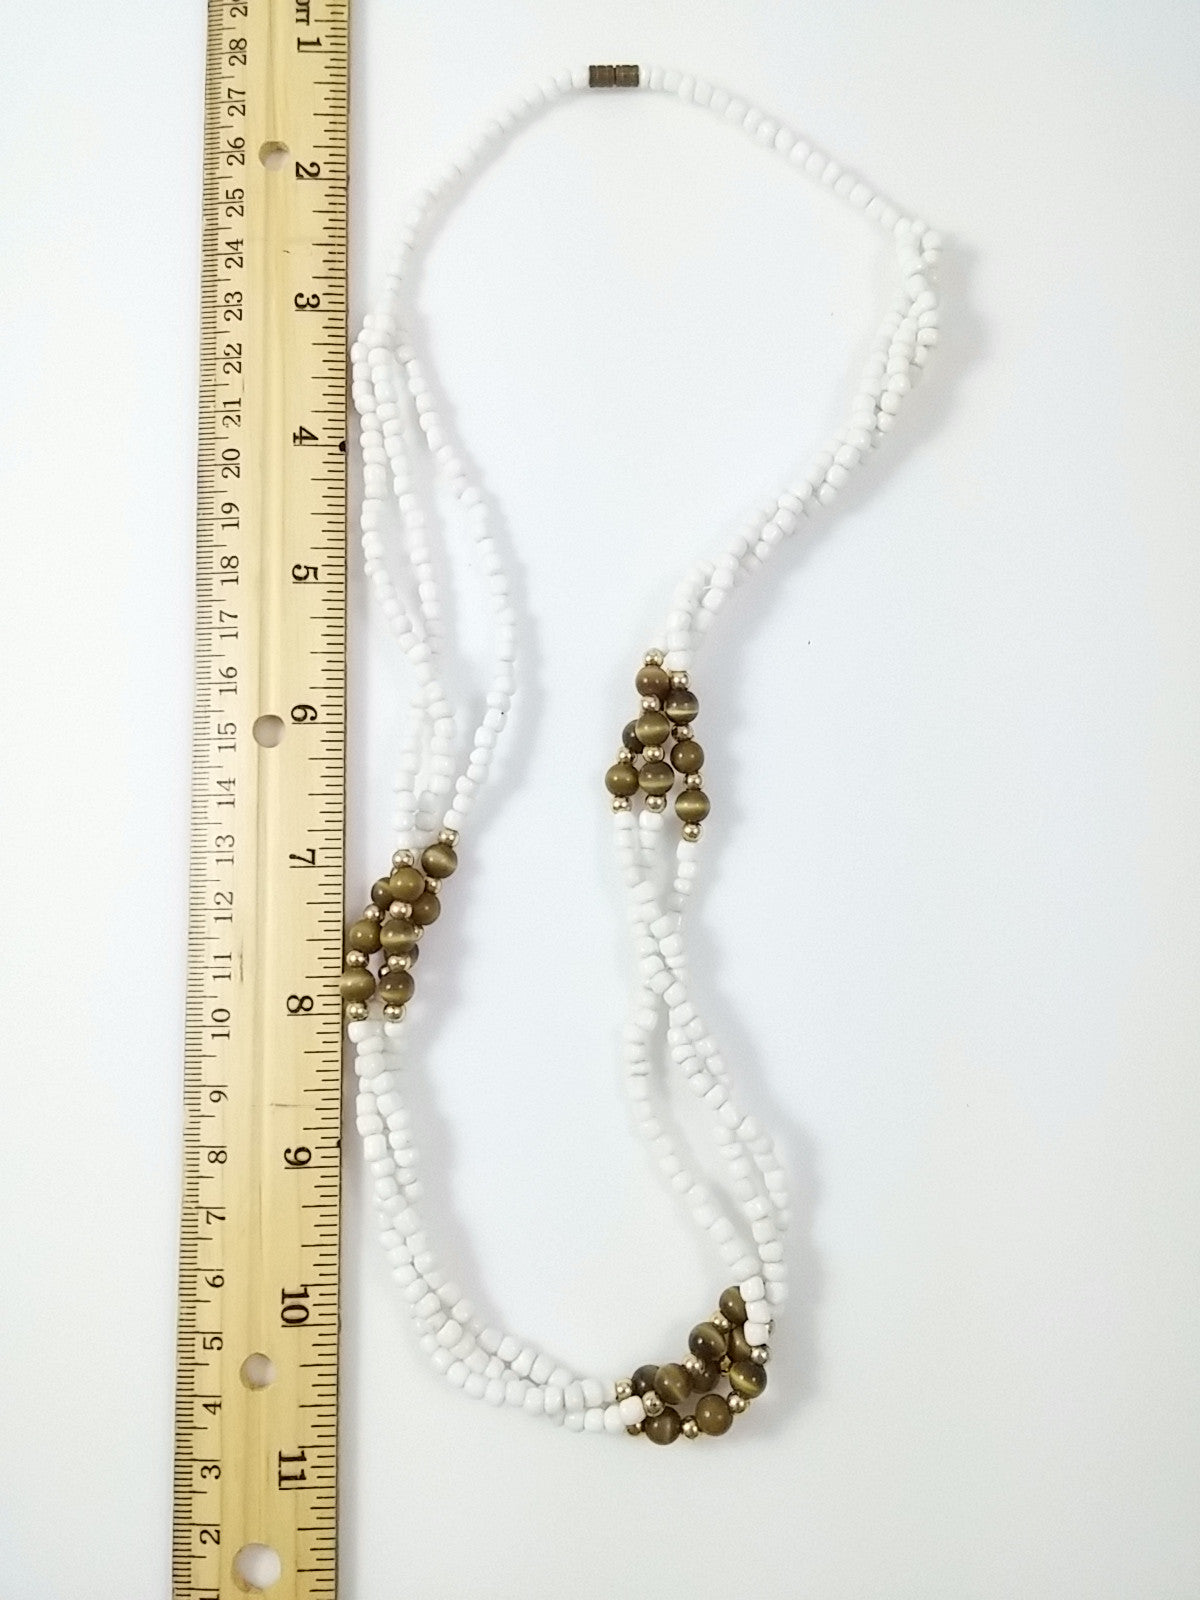 Vintage 60s Triple Strand Necklace Twisted White Beads w/ Tiger Eye Accent - Dirty 30 Vintage | Vintage Clothing, Vintage Jewelry, Vintage Accessories